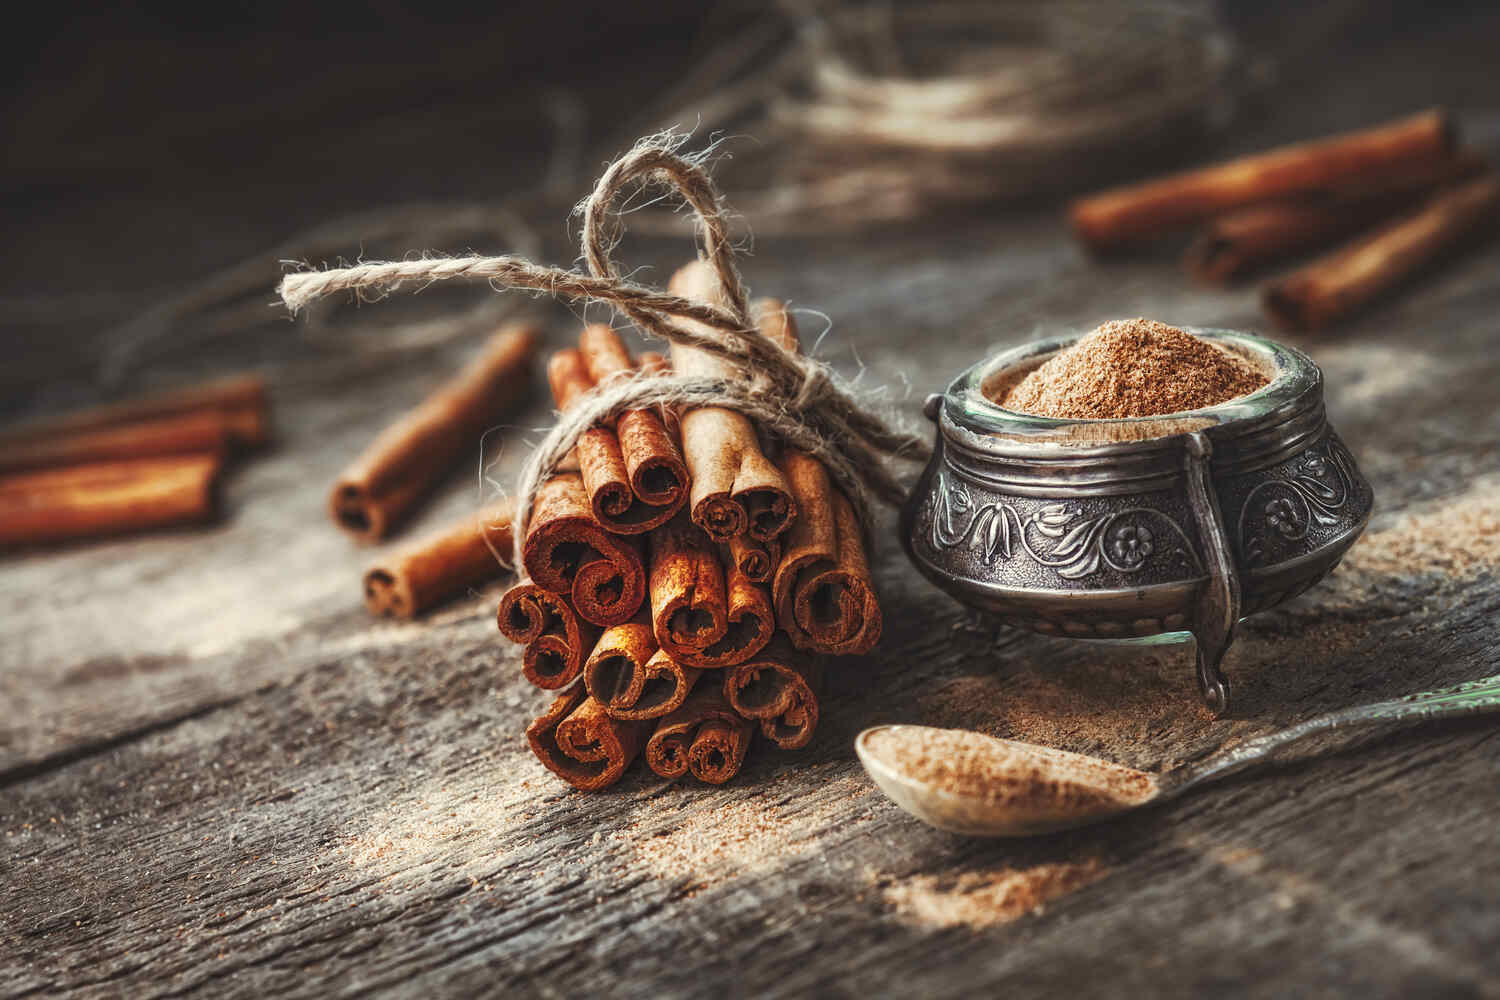 Cinnamon For Babies – When to Introduce, Benefits and Precautions